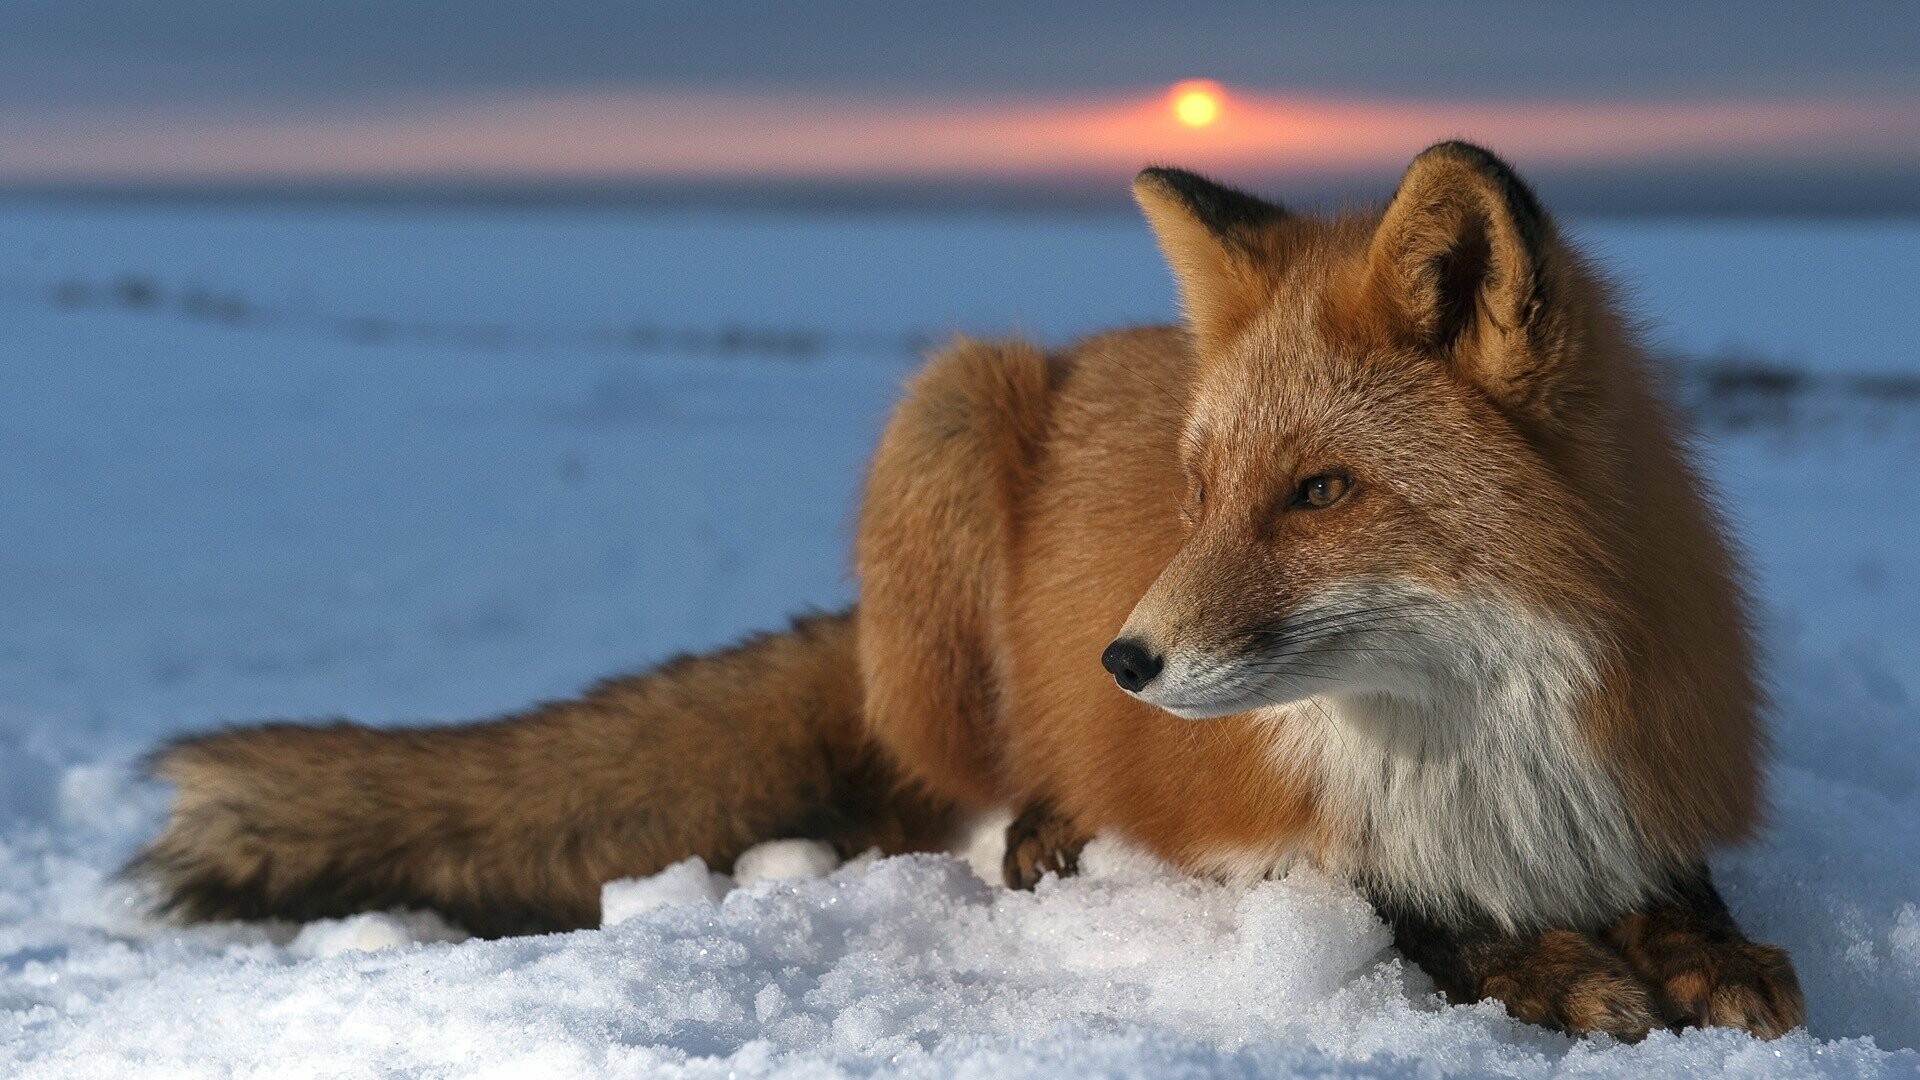 Fox: An omnivore, Hunts and forages for a variety of foods, including fruits, seeds, worms, insects, small mammals. 1920x1080 Full HD Background.